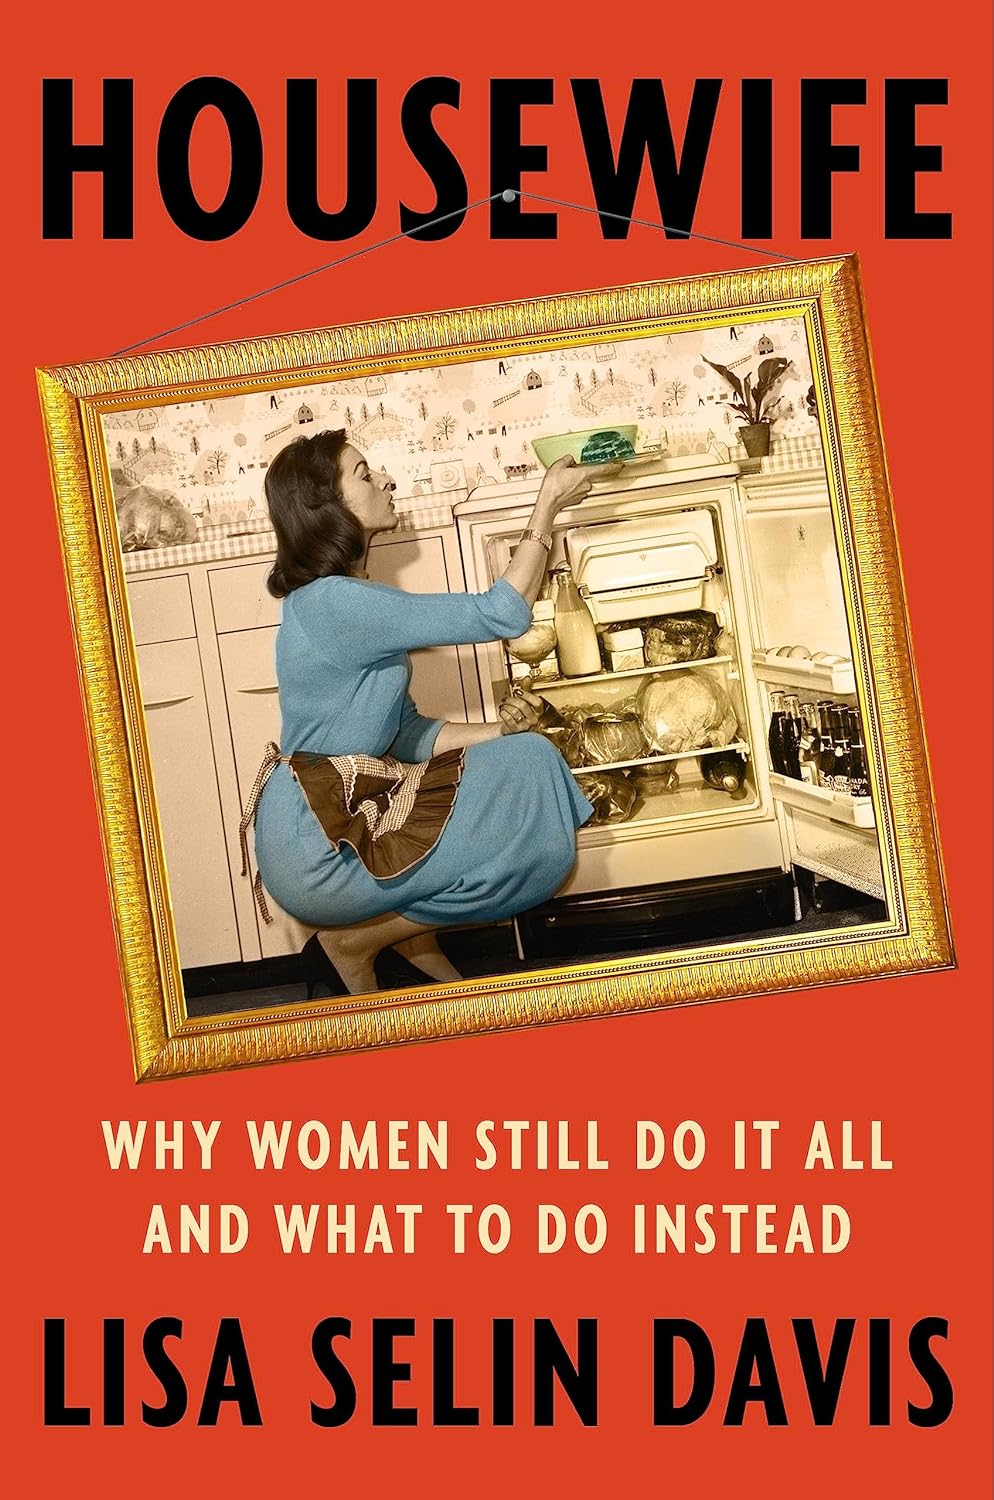 The cover of Housewife: Why Women Still Do It All and What to Do Instead